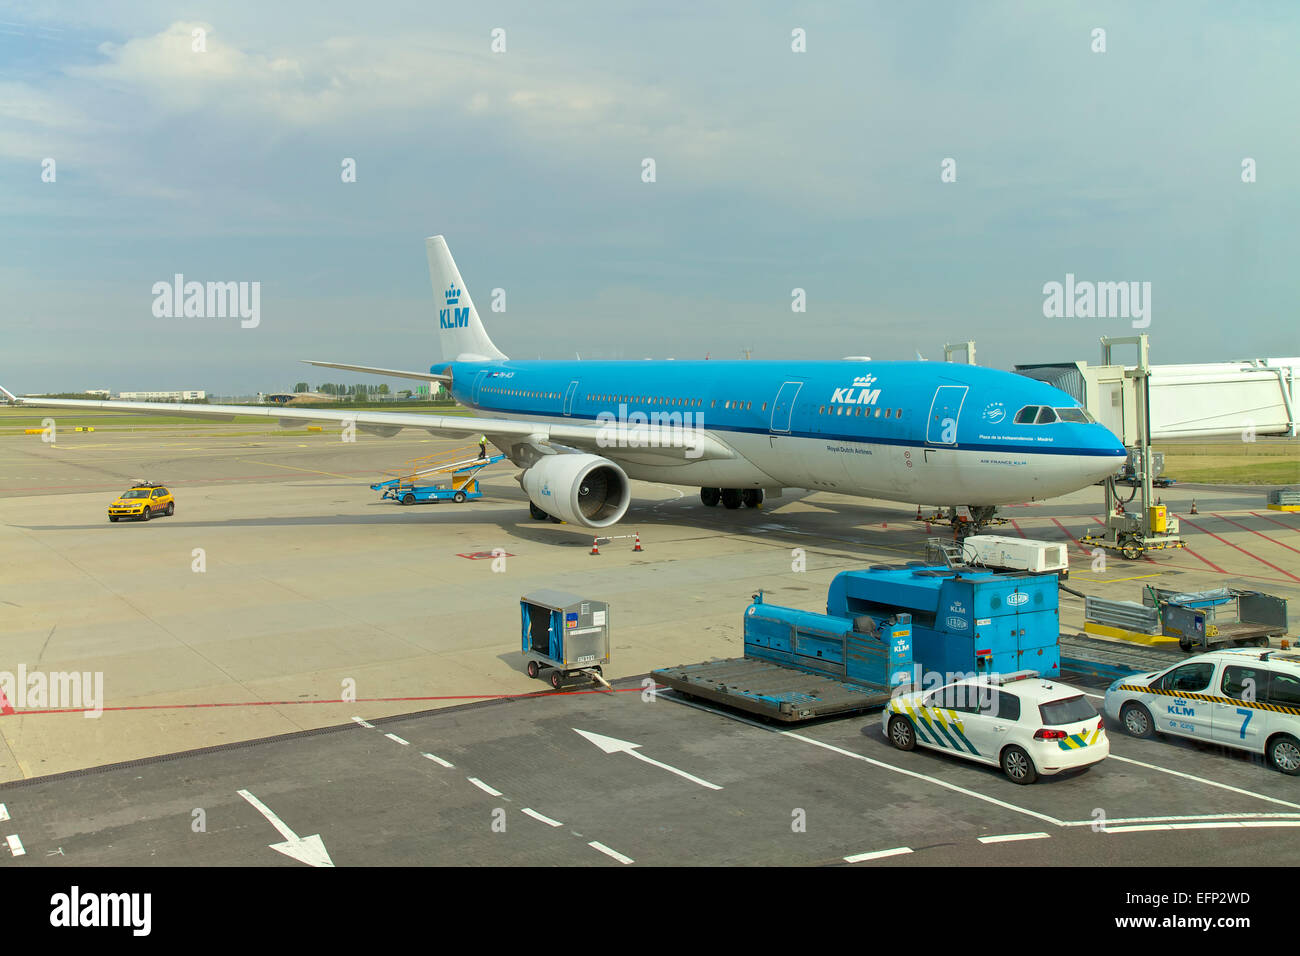 KLM Royal Dutch Airline in Schiphol, Amsterdam, Netherlands Stock Photo